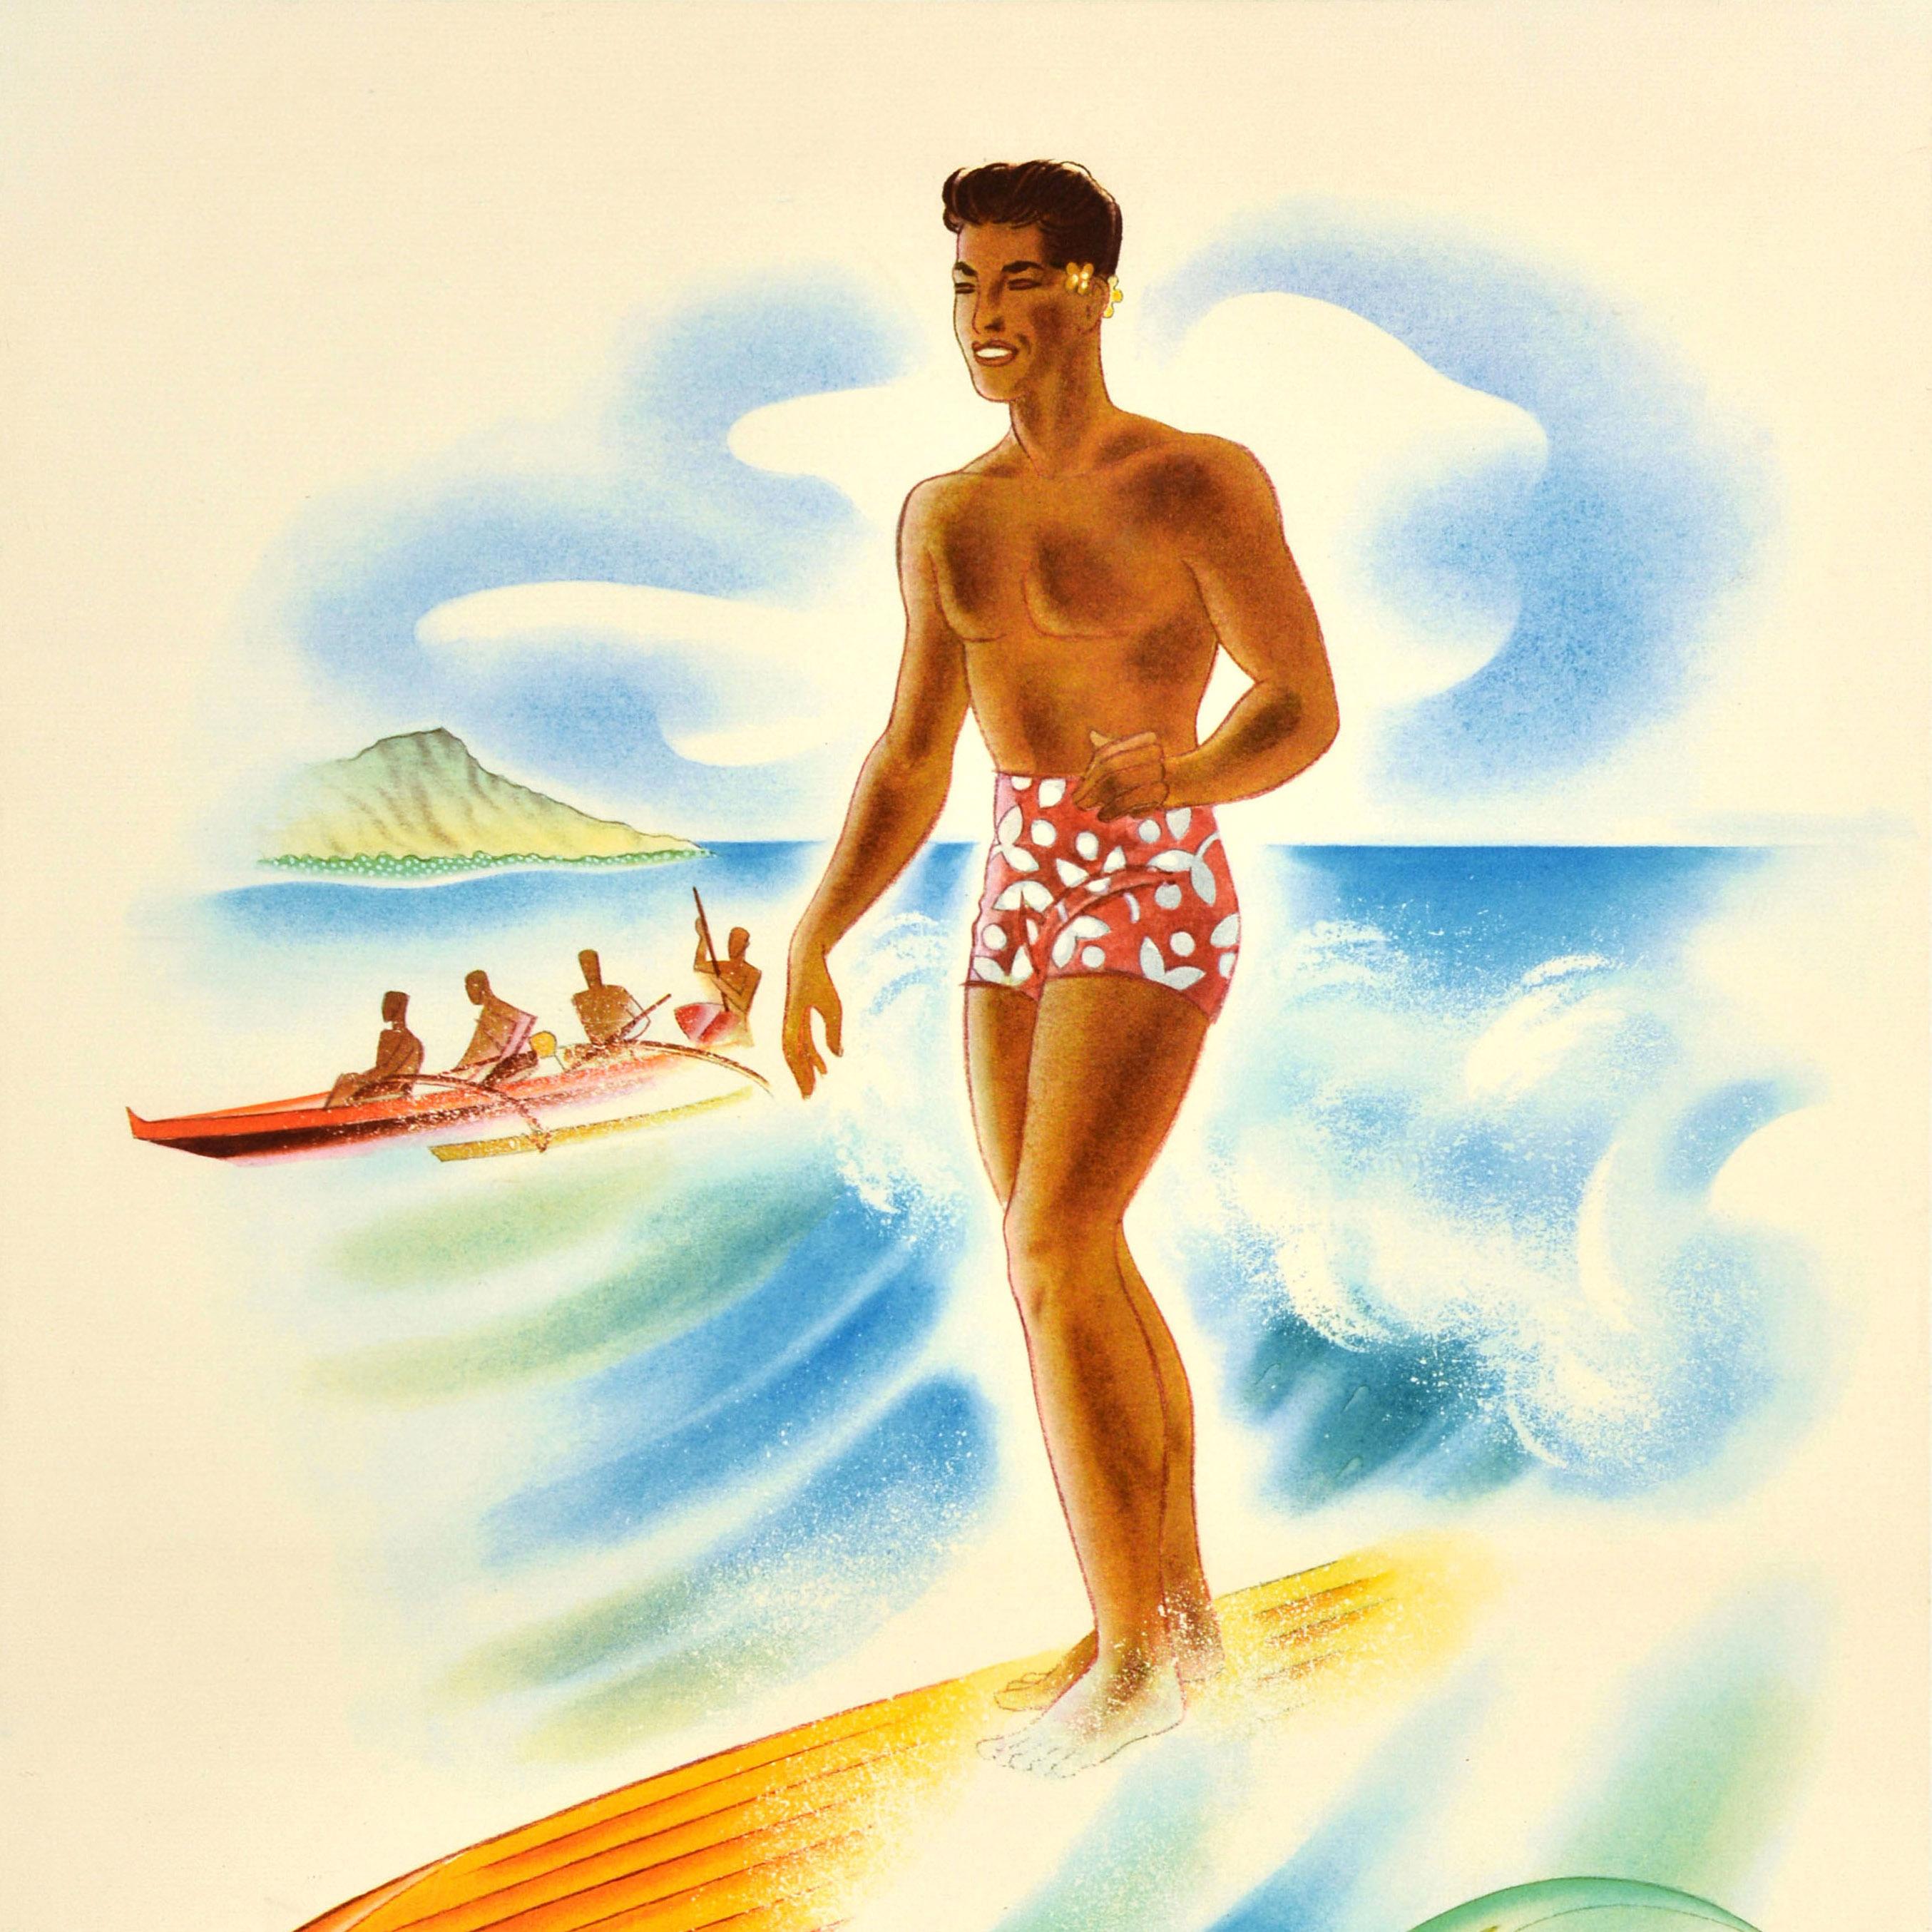 Original vintage travel poster - Matson Lines Hawaii - featuring a colourful image of a smiling surfer in red and white swimming shorts riding the waves in front of surfers in a traditional outrigger surfing canoe and the volcanic Diamond Head